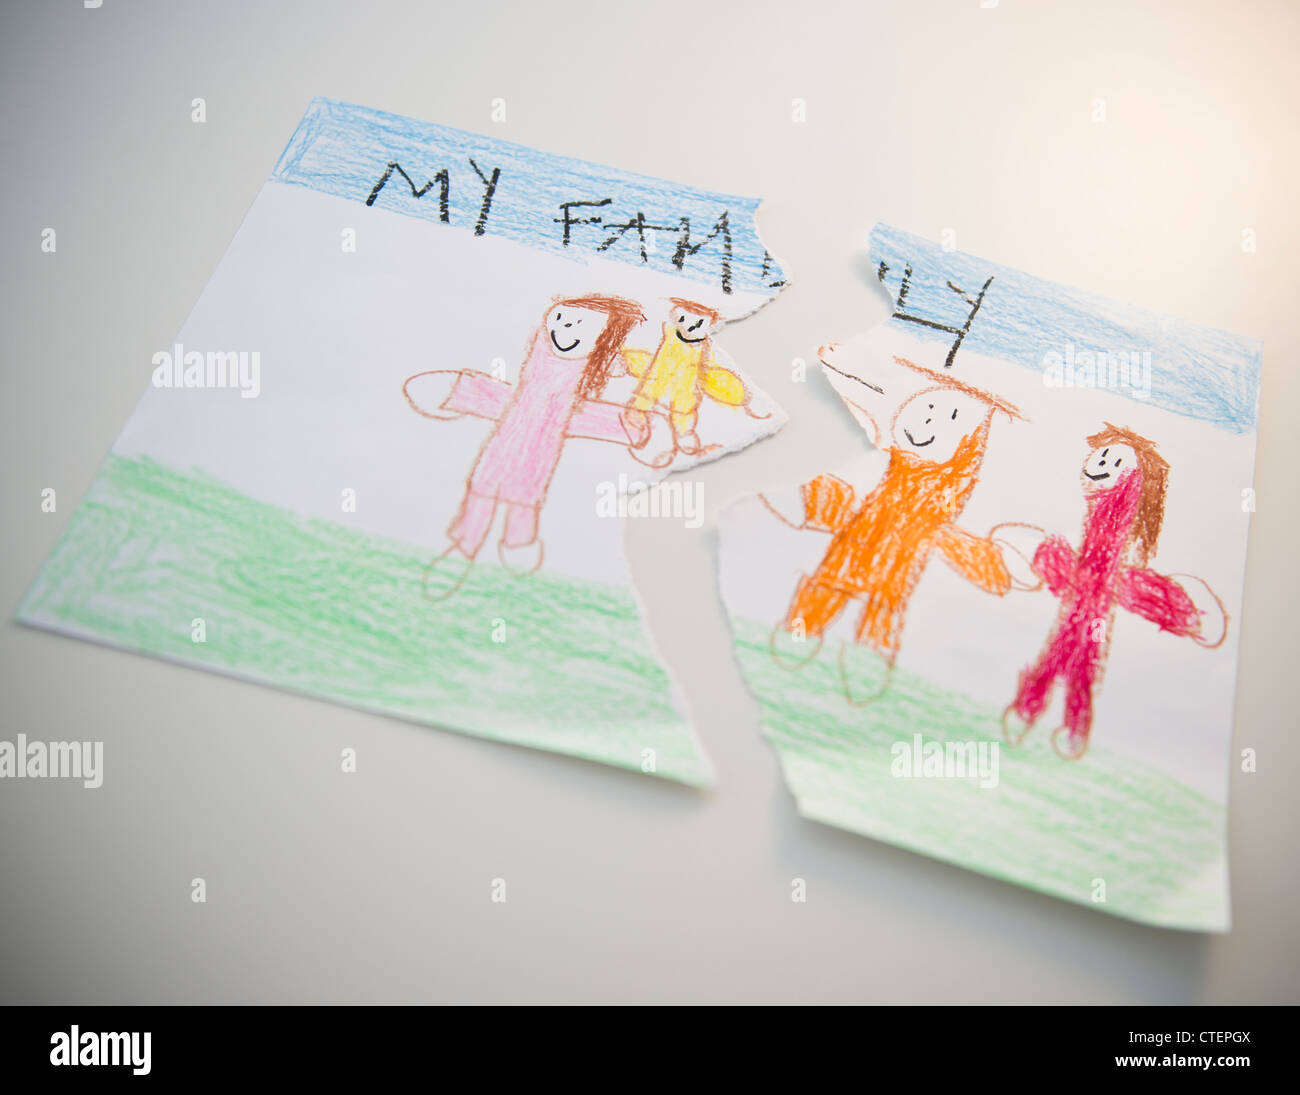 Torn child's drawing depicting family Stock Photo